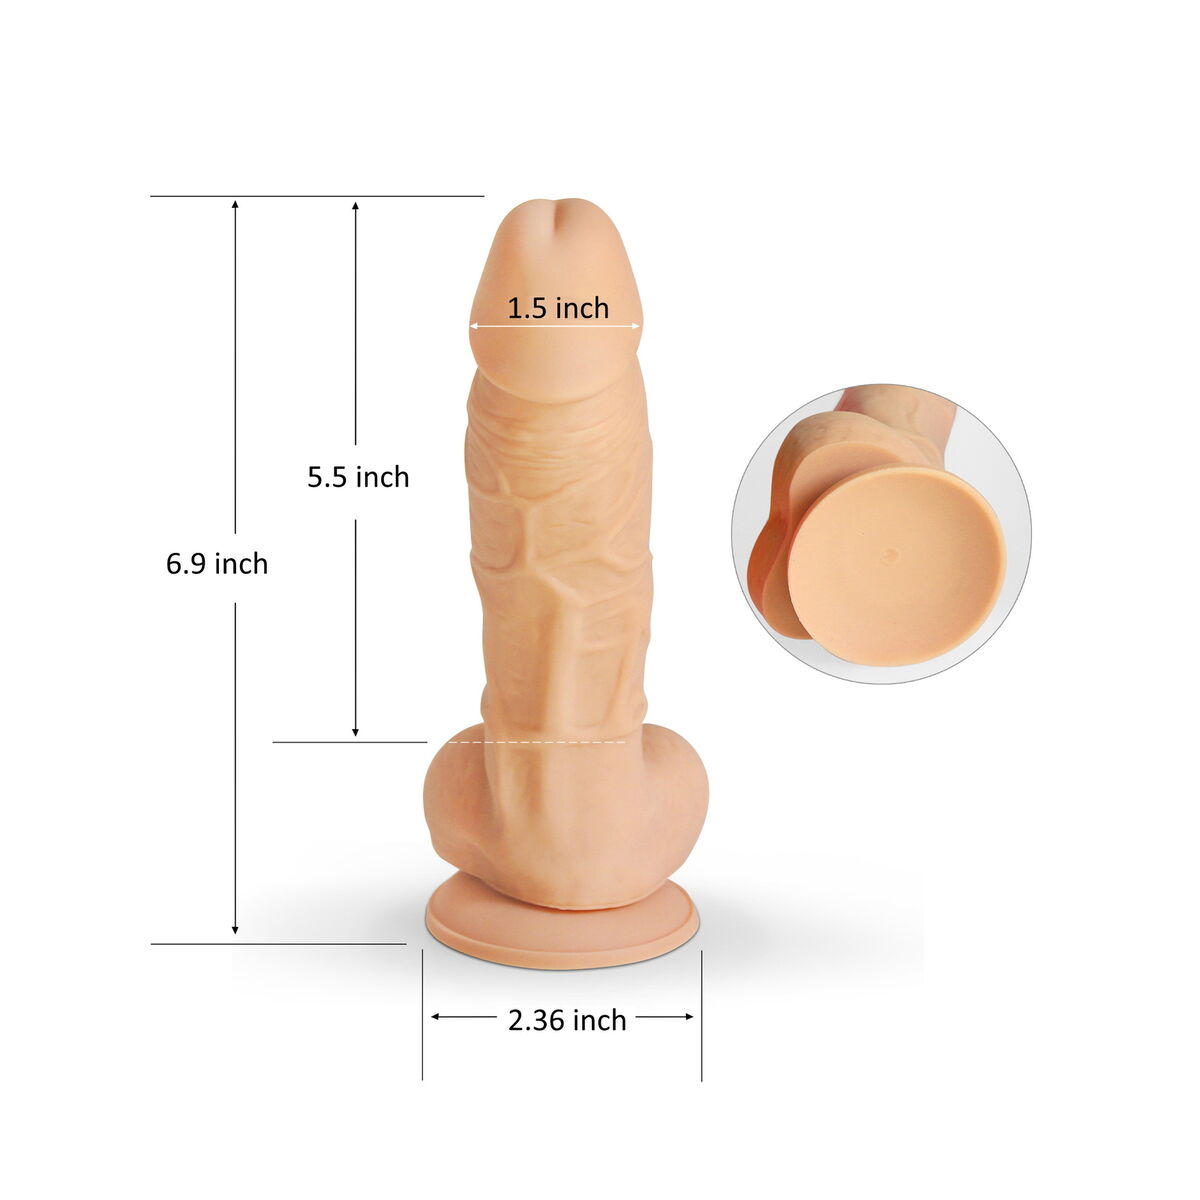 adam malm recommends 6 Inch Penis Nude